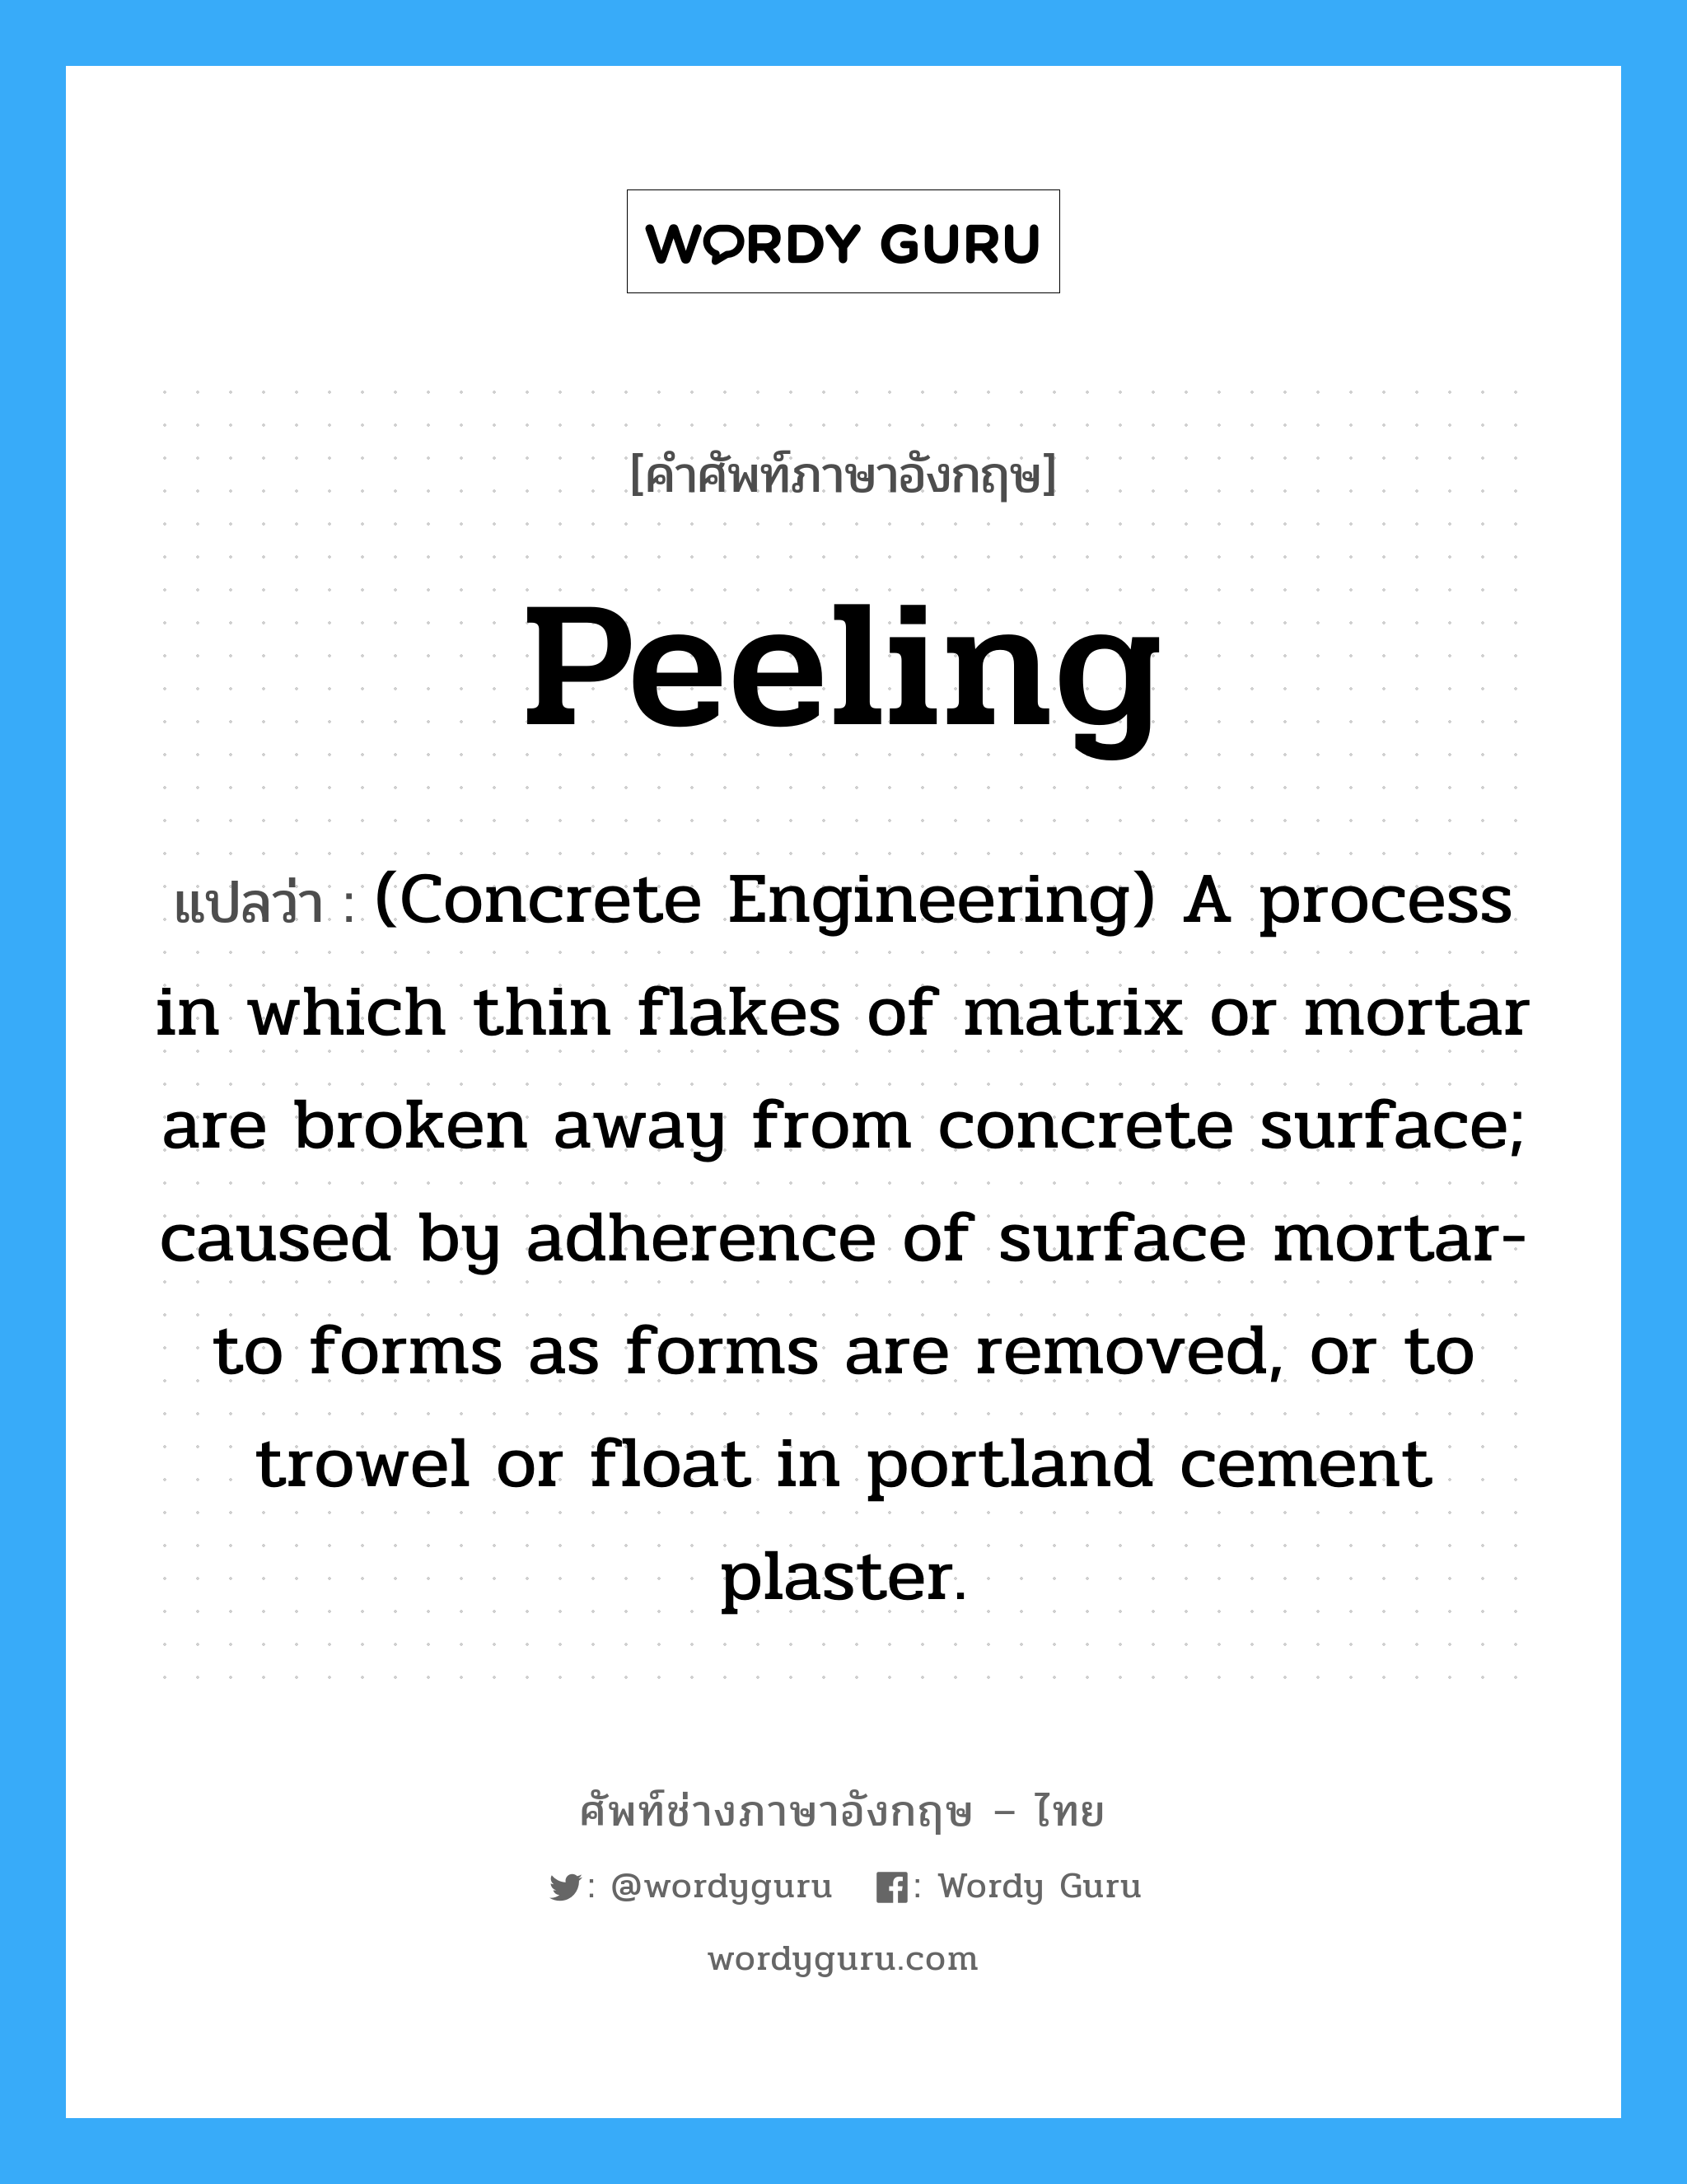 Peeling แปลว่า?, คำศัพท์ช่างภาษาอังกฤษ - ไทย Peeling คำศัพท์ภาษาอังกฤษ Peeling แปลว่า (Concrete Engineering) A process in which thin flakes of matrix or mortar are broken away from concrete surface; caused by adherence of surface mortar-to forms as forms are removed, or to trowel or float in portland cement plaster.